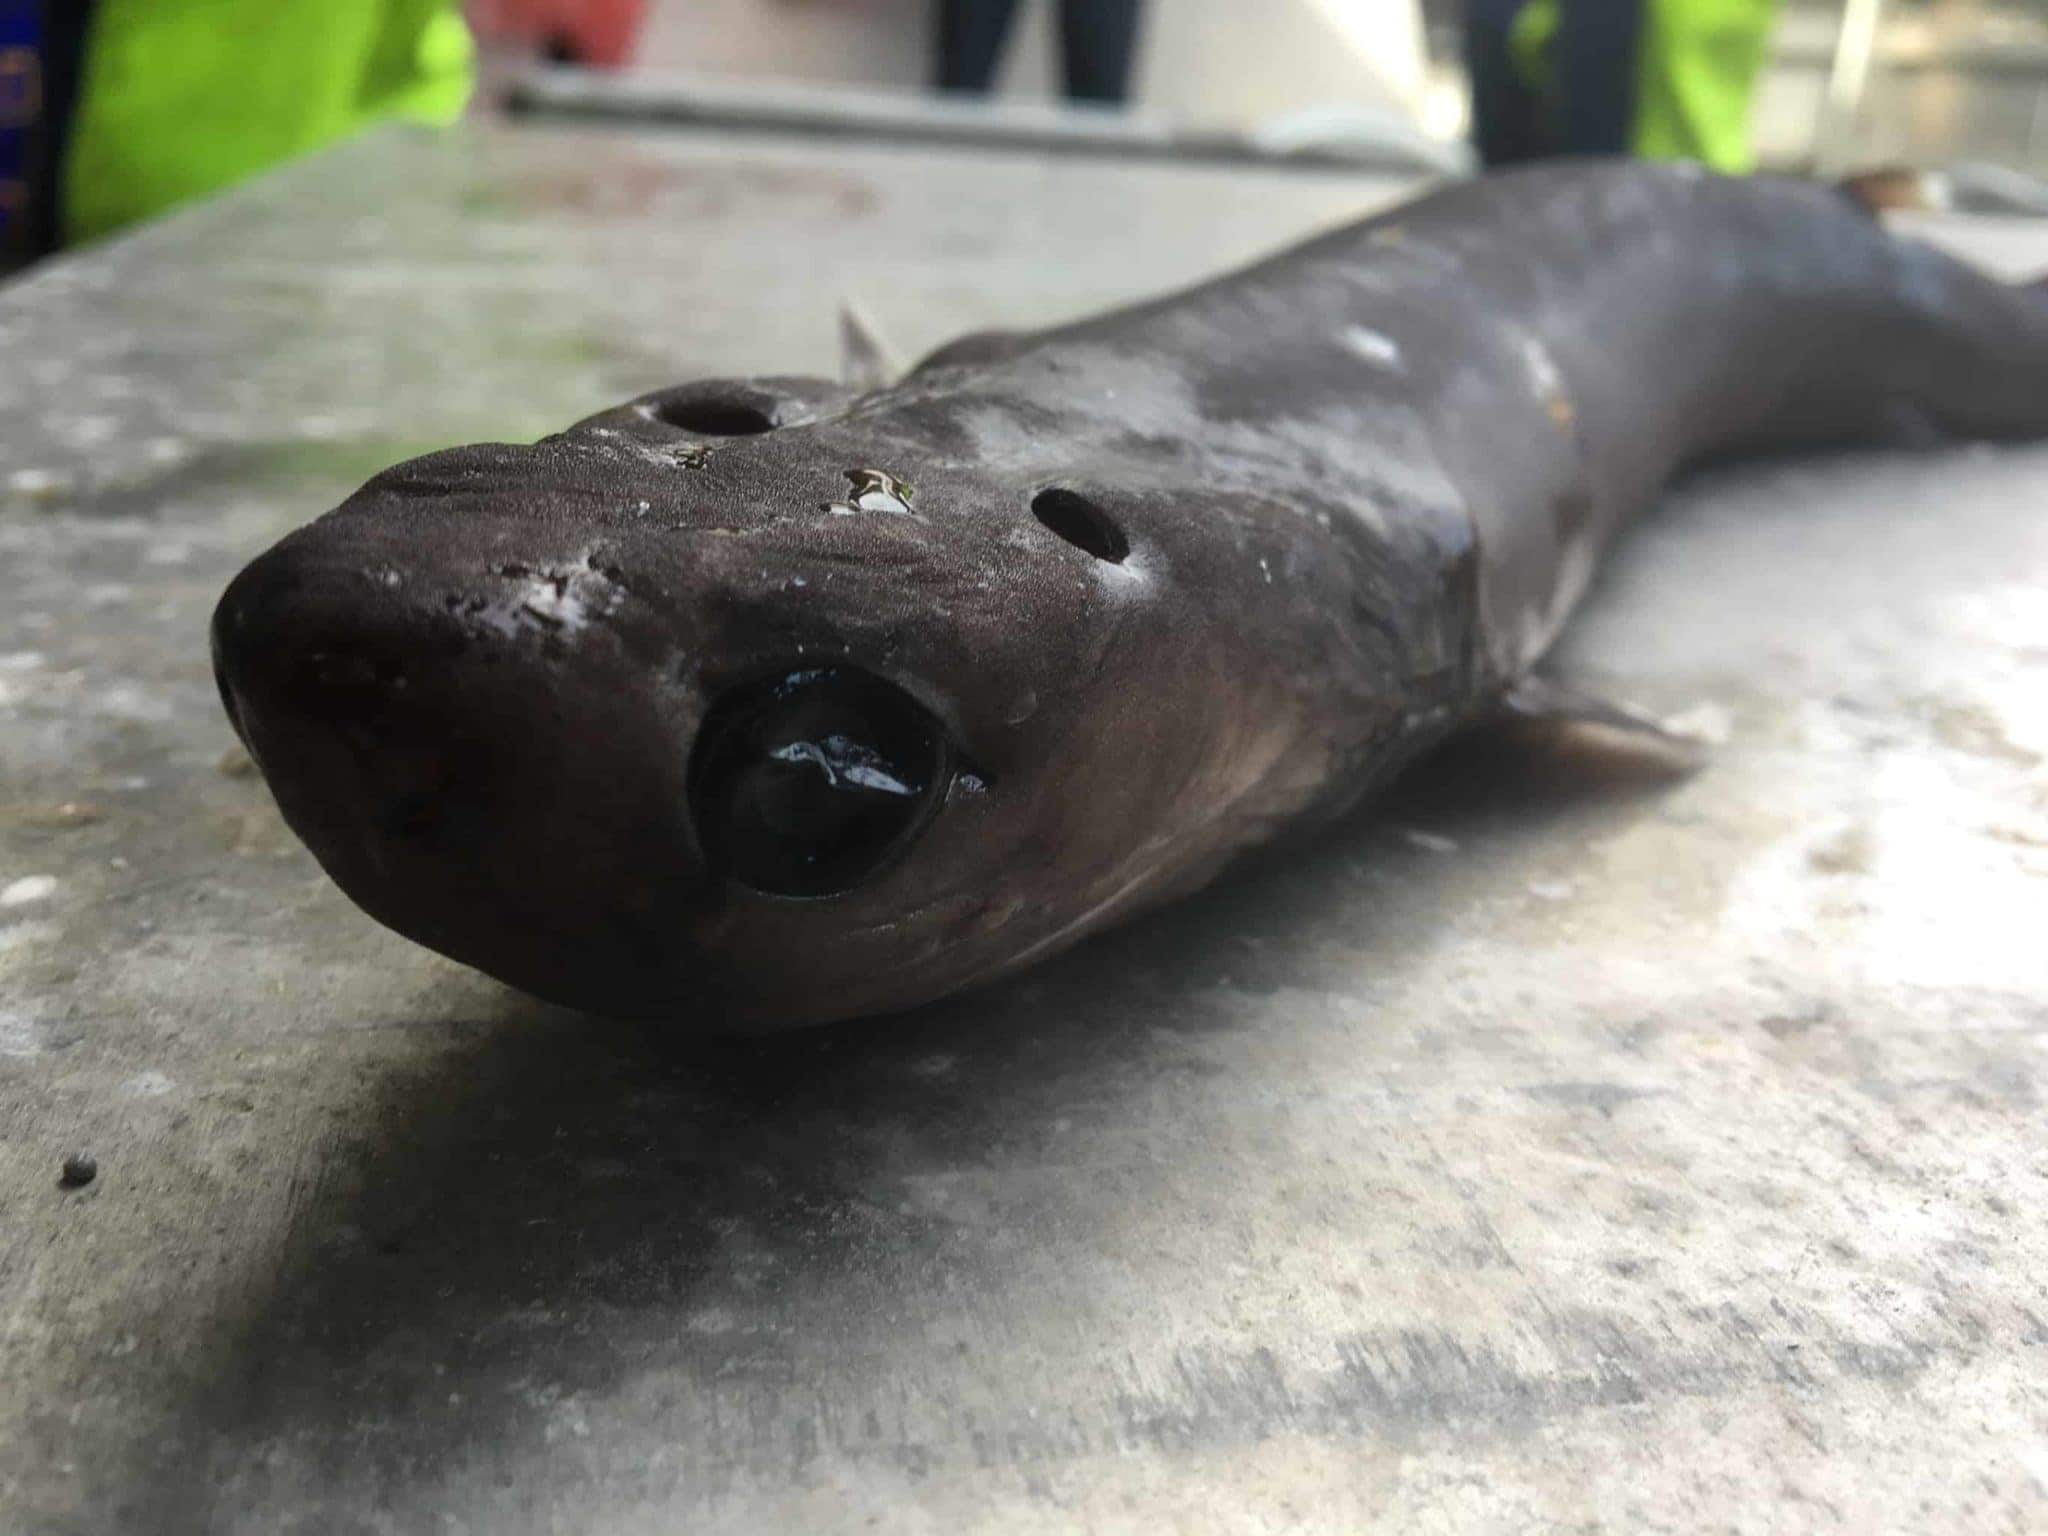 Todd Abbott handed this cookiecutter shark to CSIRO for research.